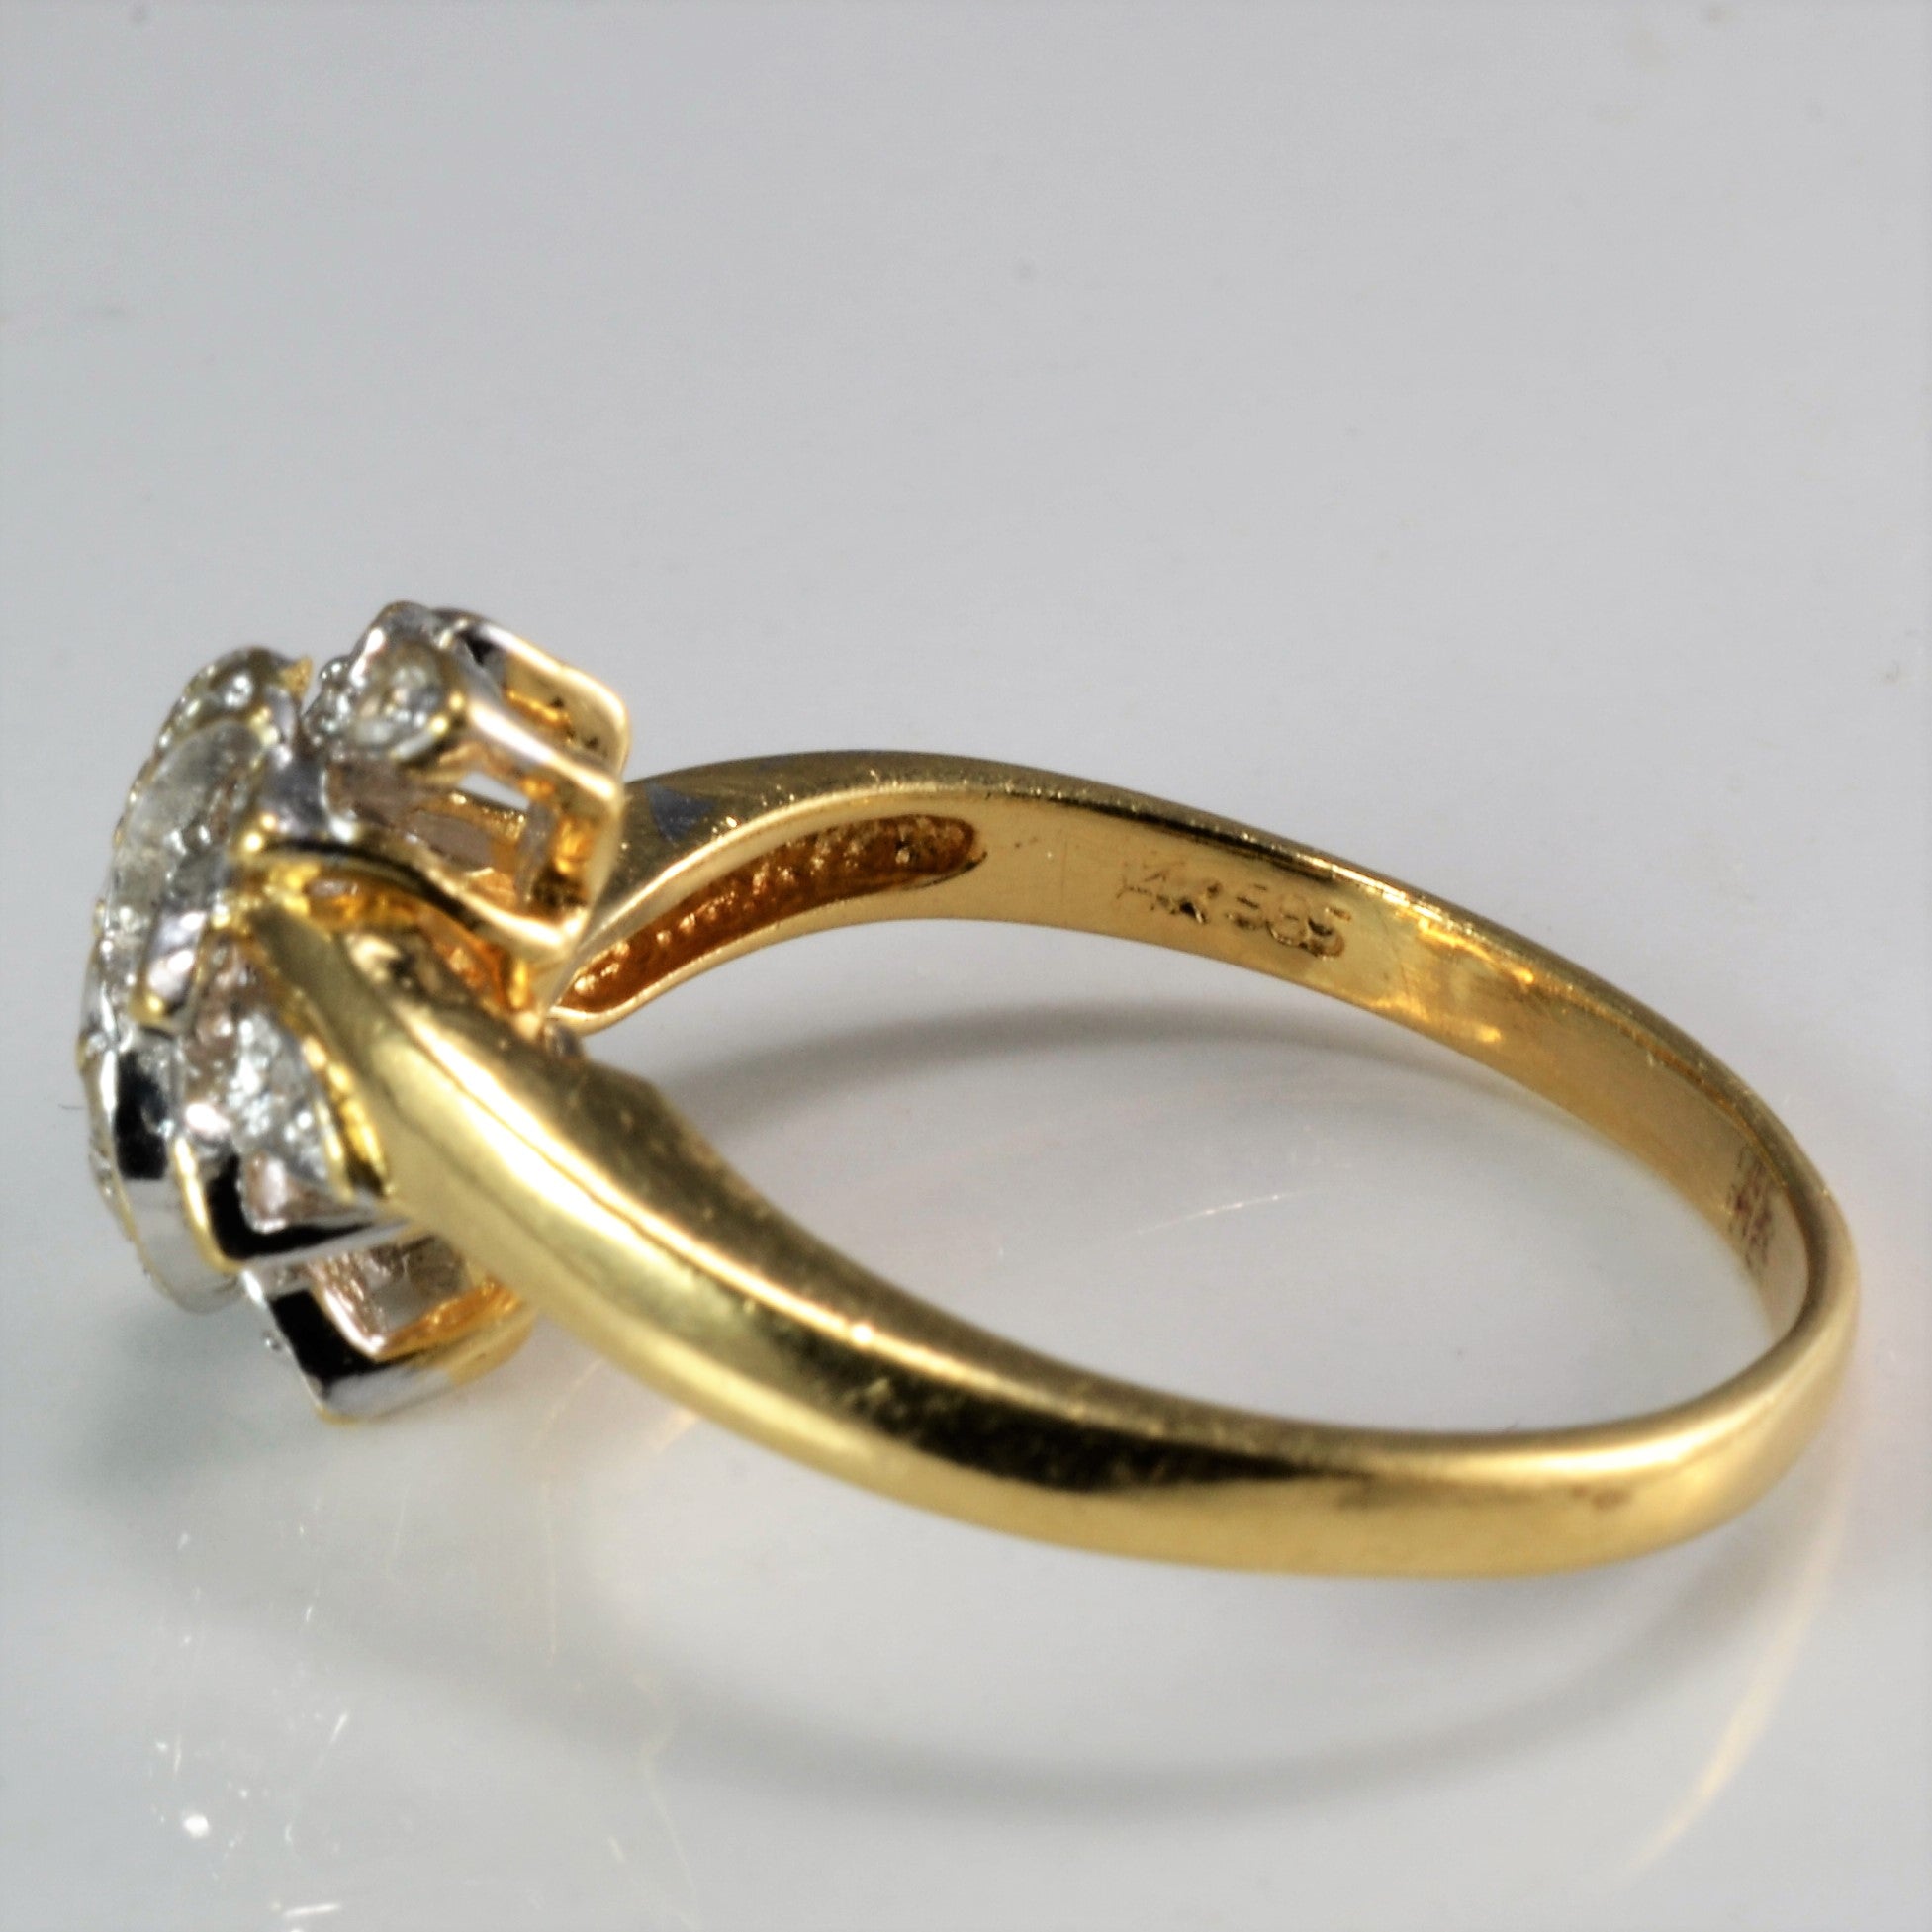 Floral Inspired Cluster Diamond Ring | 0.15 ctw, SZ 7.5 |